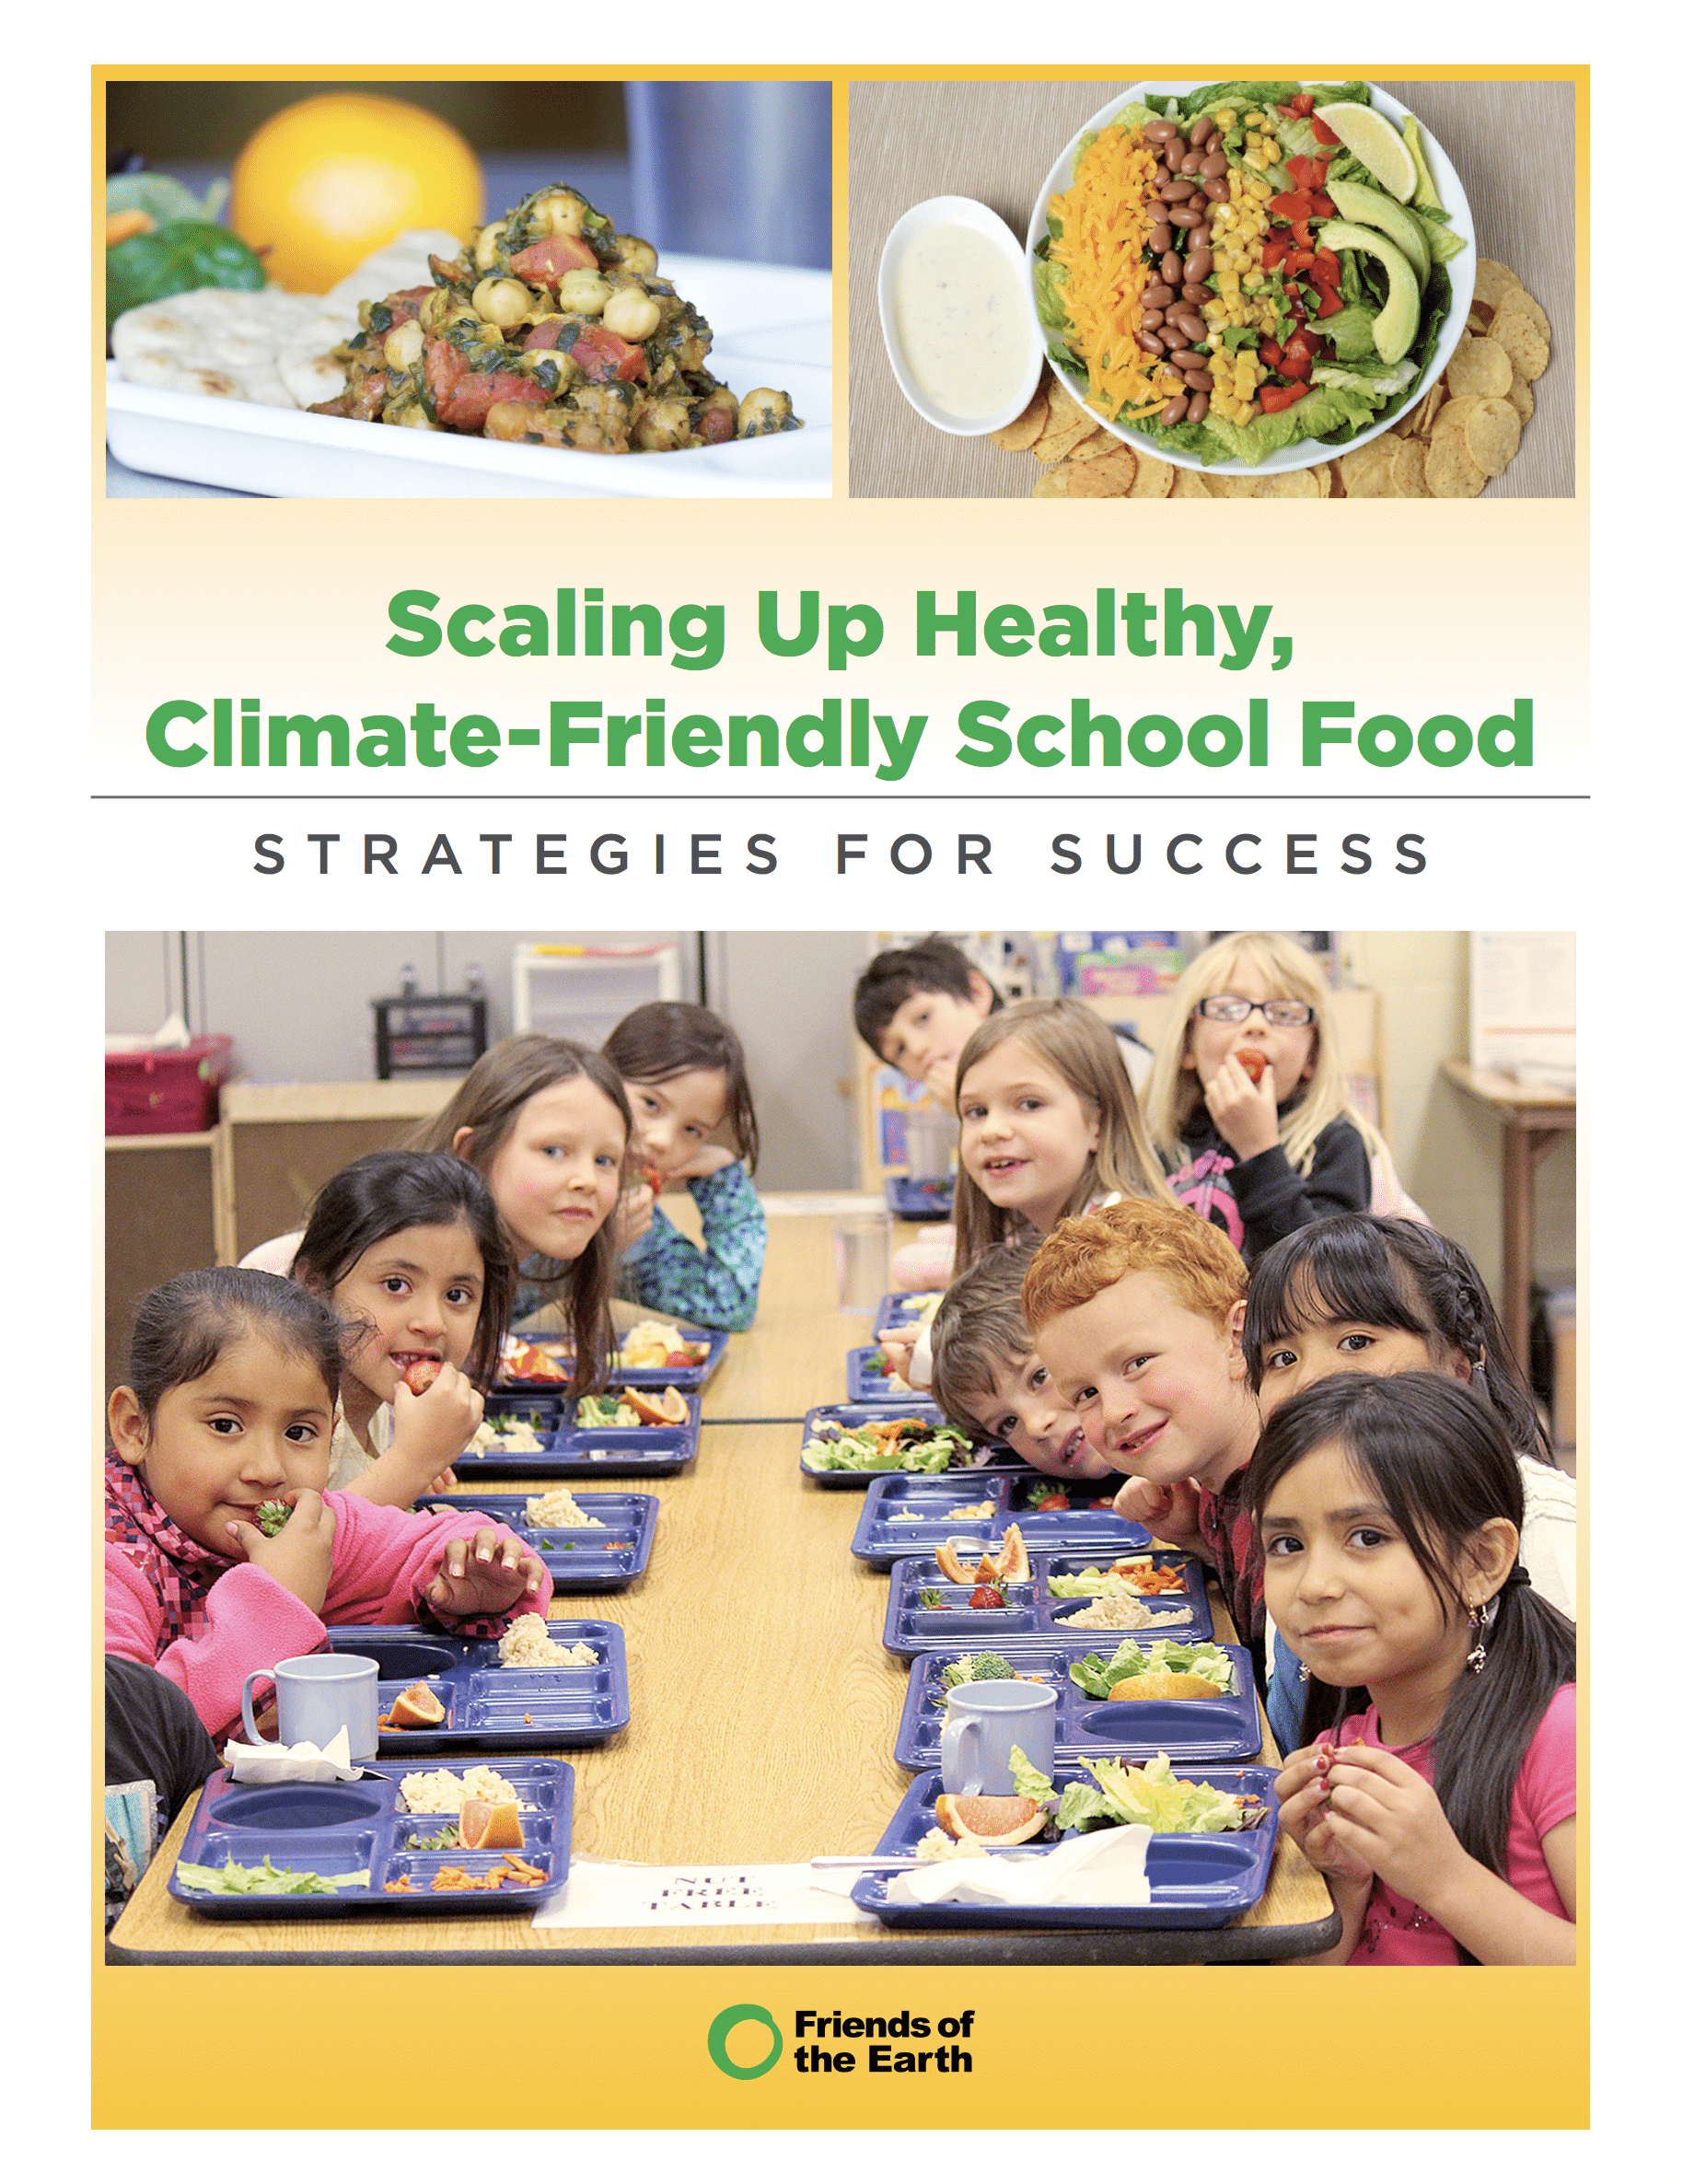 Scaling Up Healthy, Climate-Friendly School Food